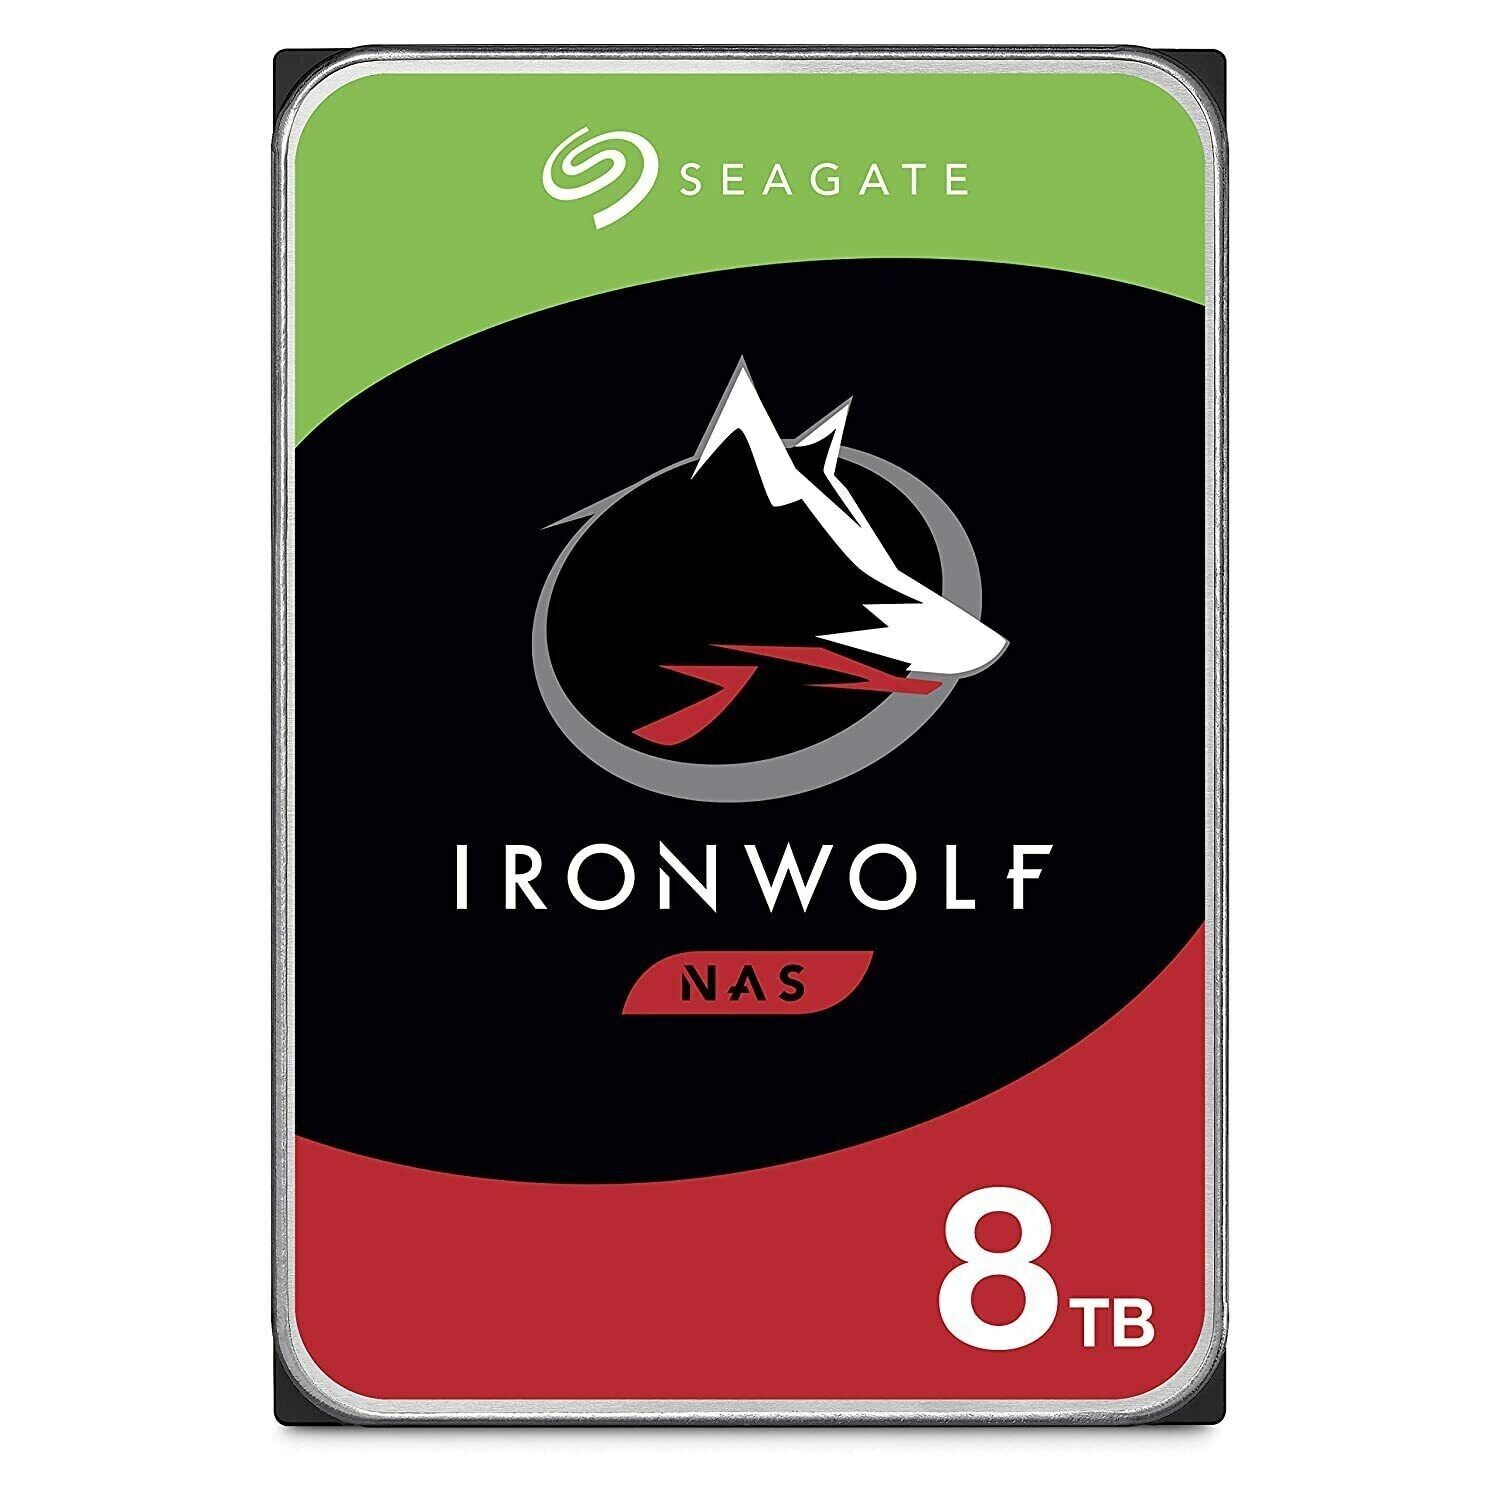 Seagate IronWolf 8TB NAS Internal HDD CMR 3.5in SATA 7200 RPM (ST8000VN004) NEW